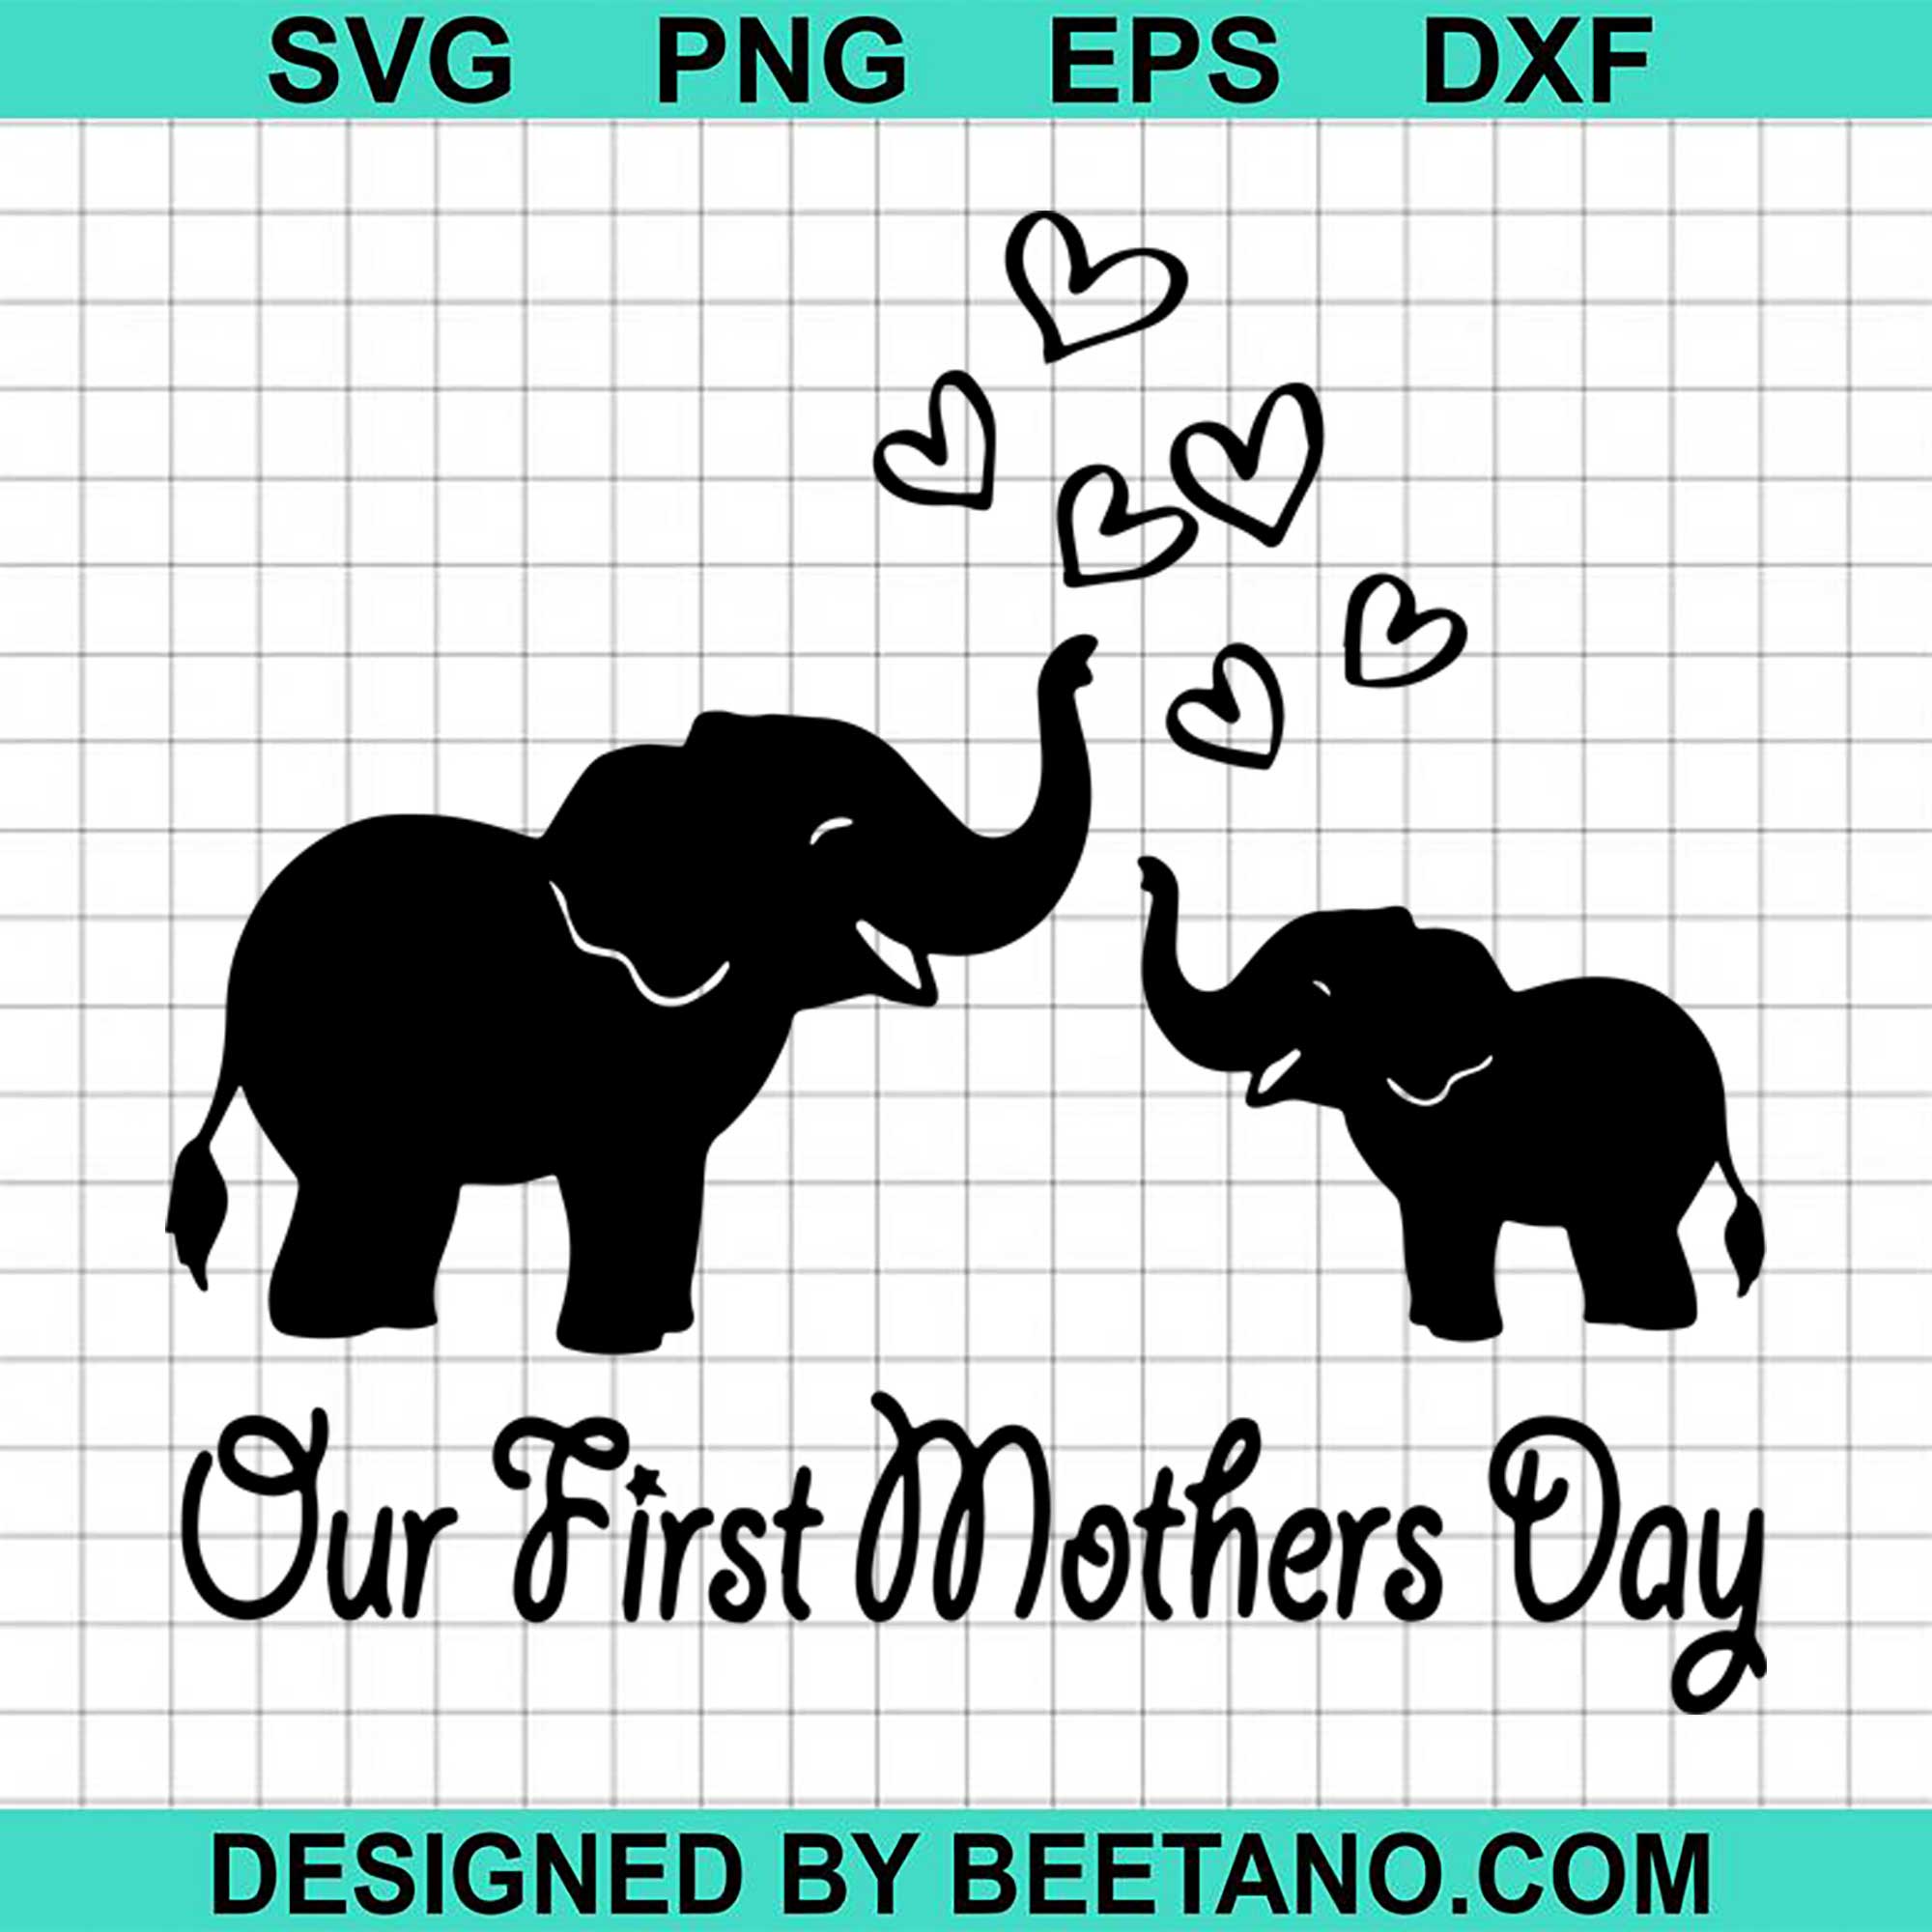 Elephant Matching Mom Baby Our First Mother Day Svg Cut File For Cricu